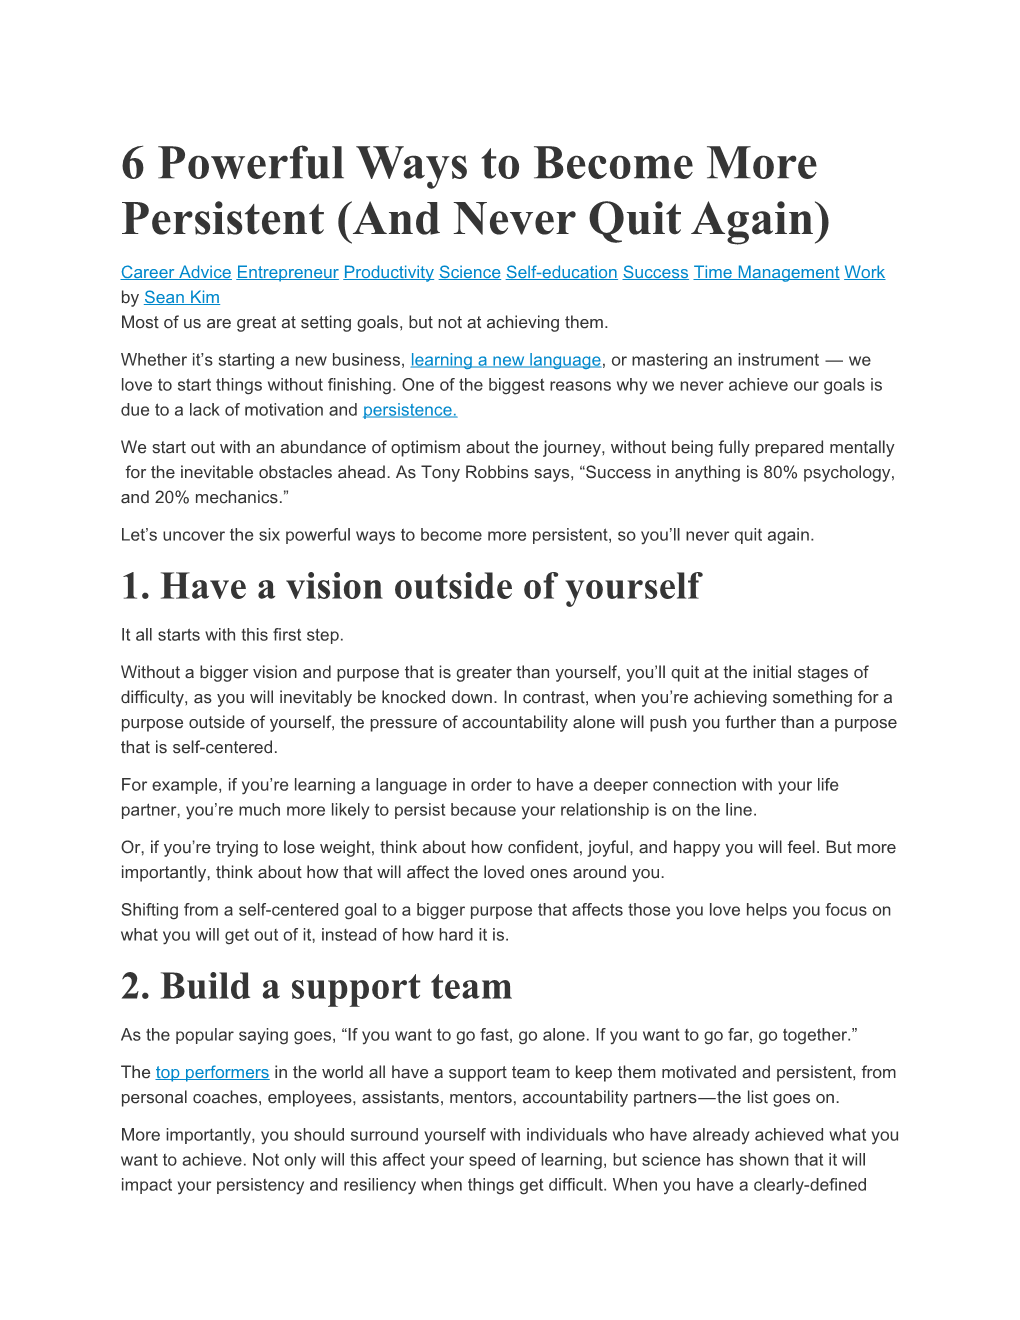 6 Powerful Ways to Become More Persistent (And Never Quit Again)